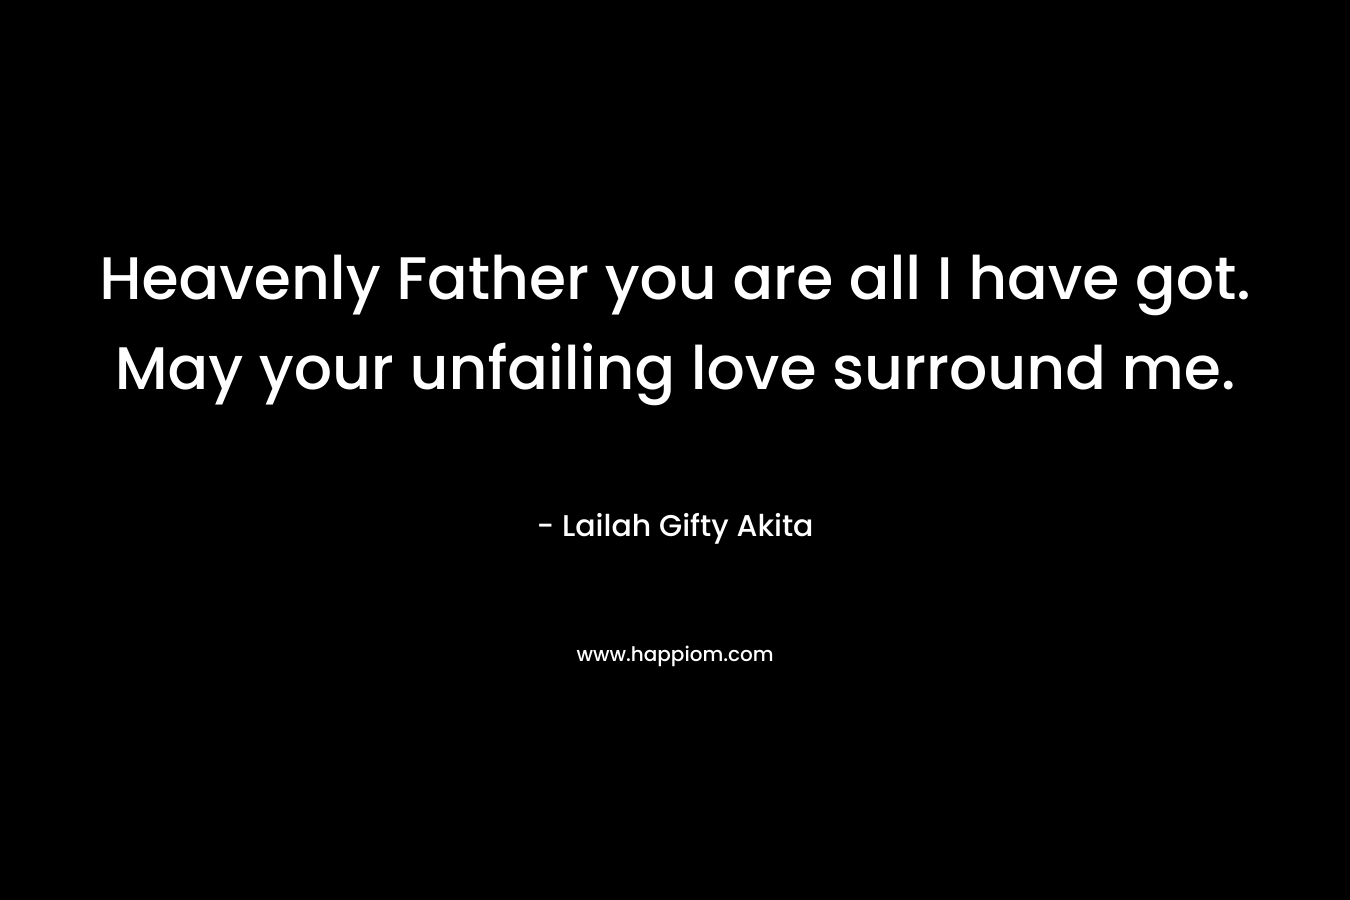 Heavenly Father you are all I have got. May your unfailing love surround me.